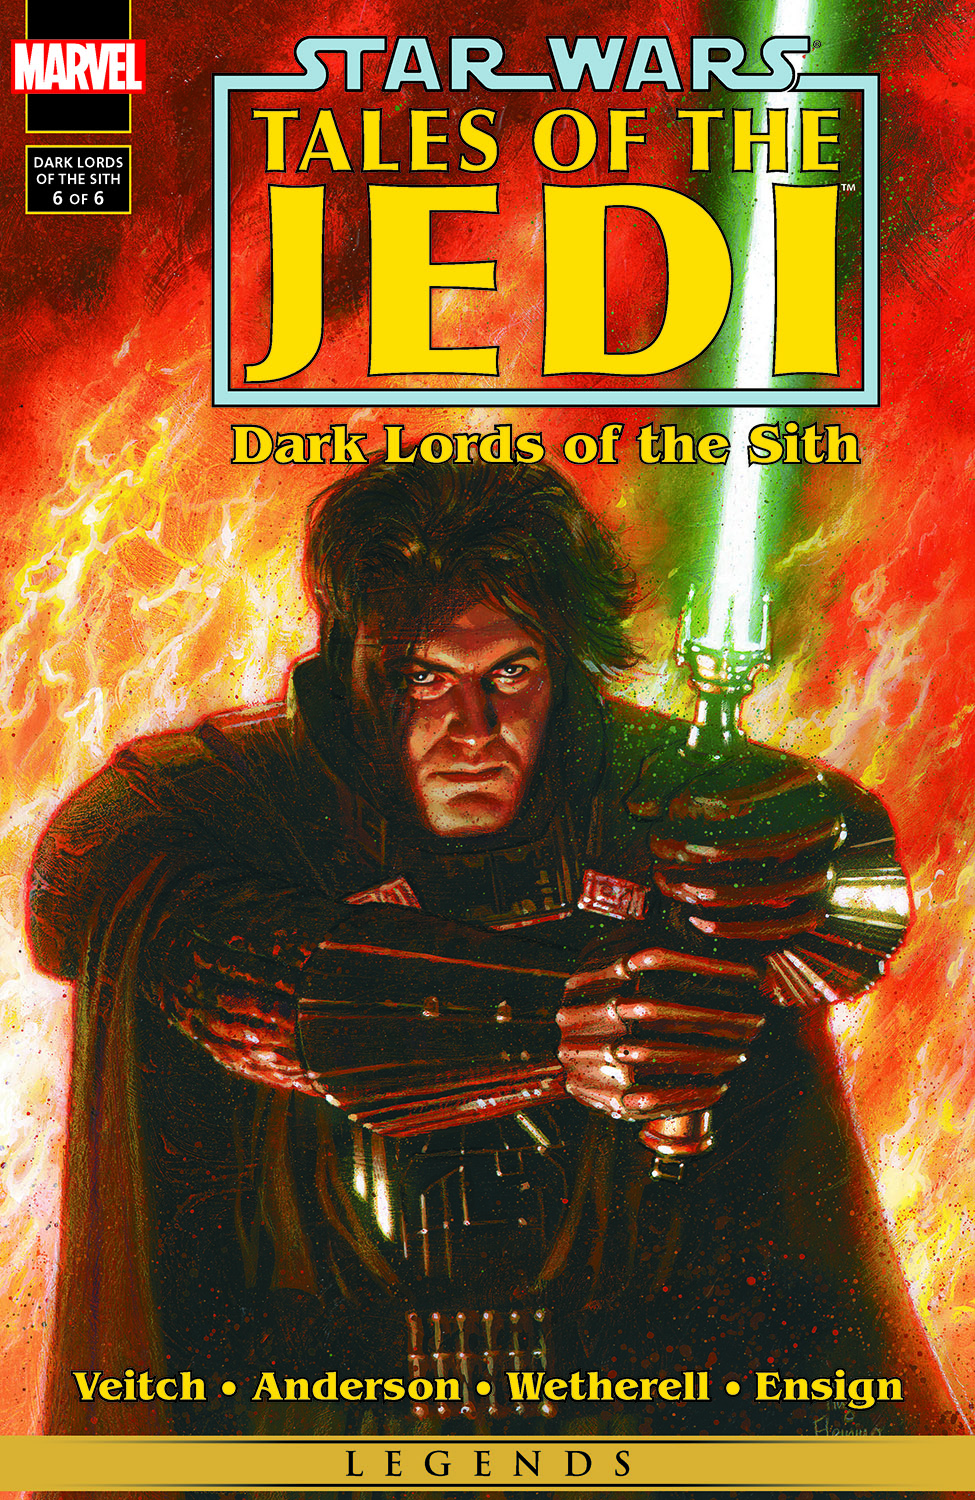 Star Wars: Tales of the Jedi - Dark Lords of the Sith (1994) #6